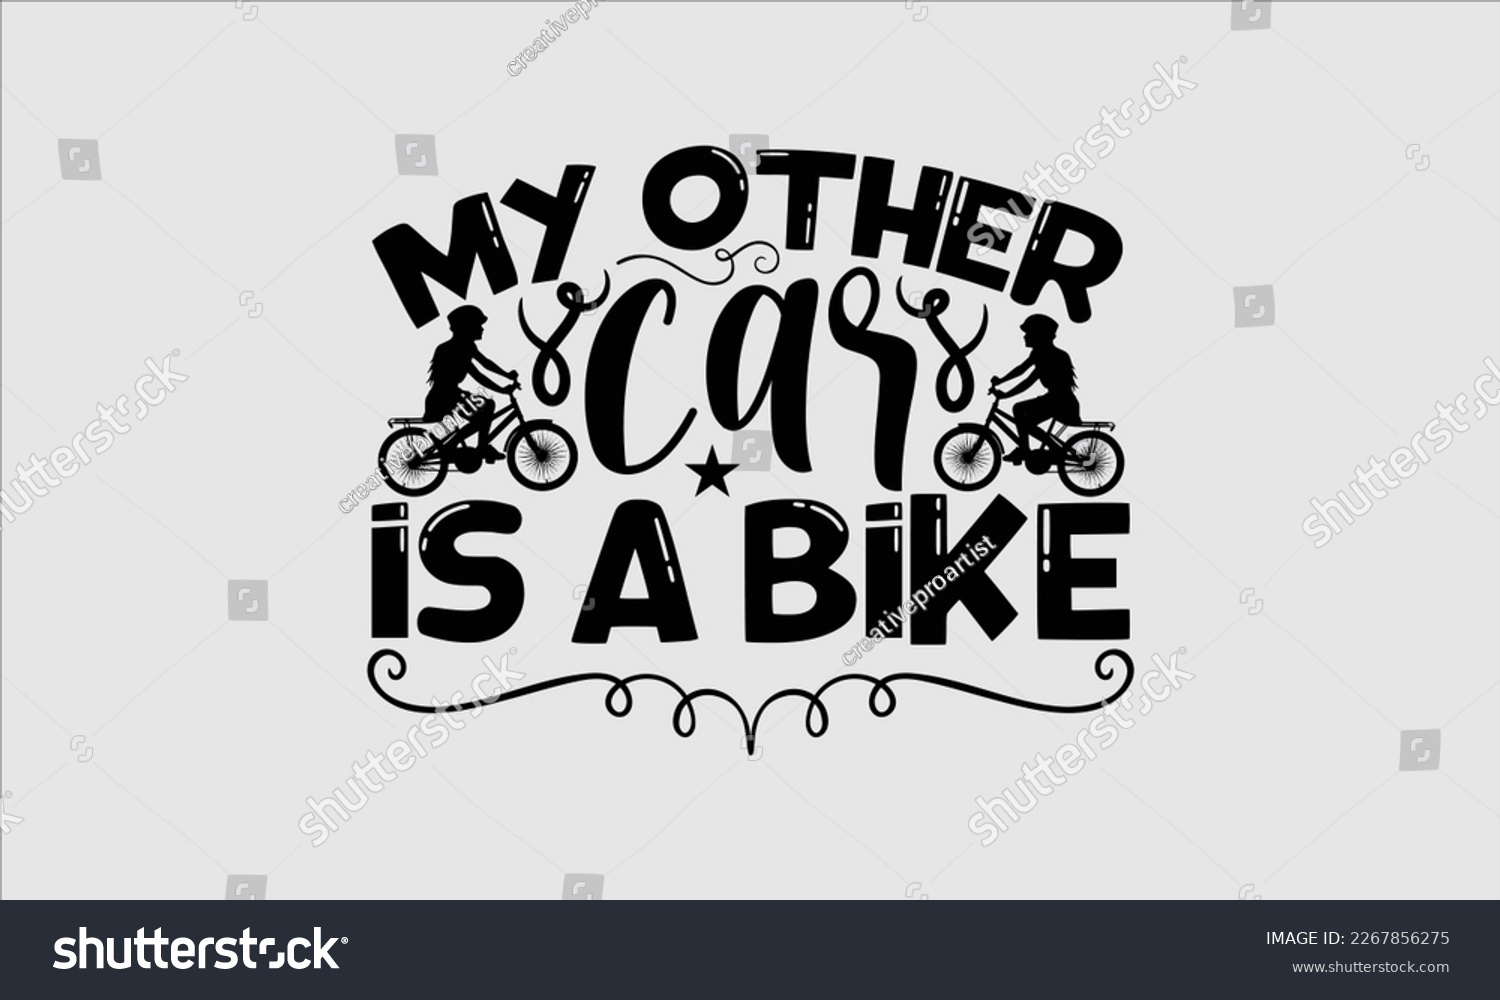 SVG of My other car is a bike- Sycle t-shirt design, Hand drawn lettering phrase, Illustration for prints on svg and bags, posters. Handmade calligraphy vector illustration, white background. eps 10 svg